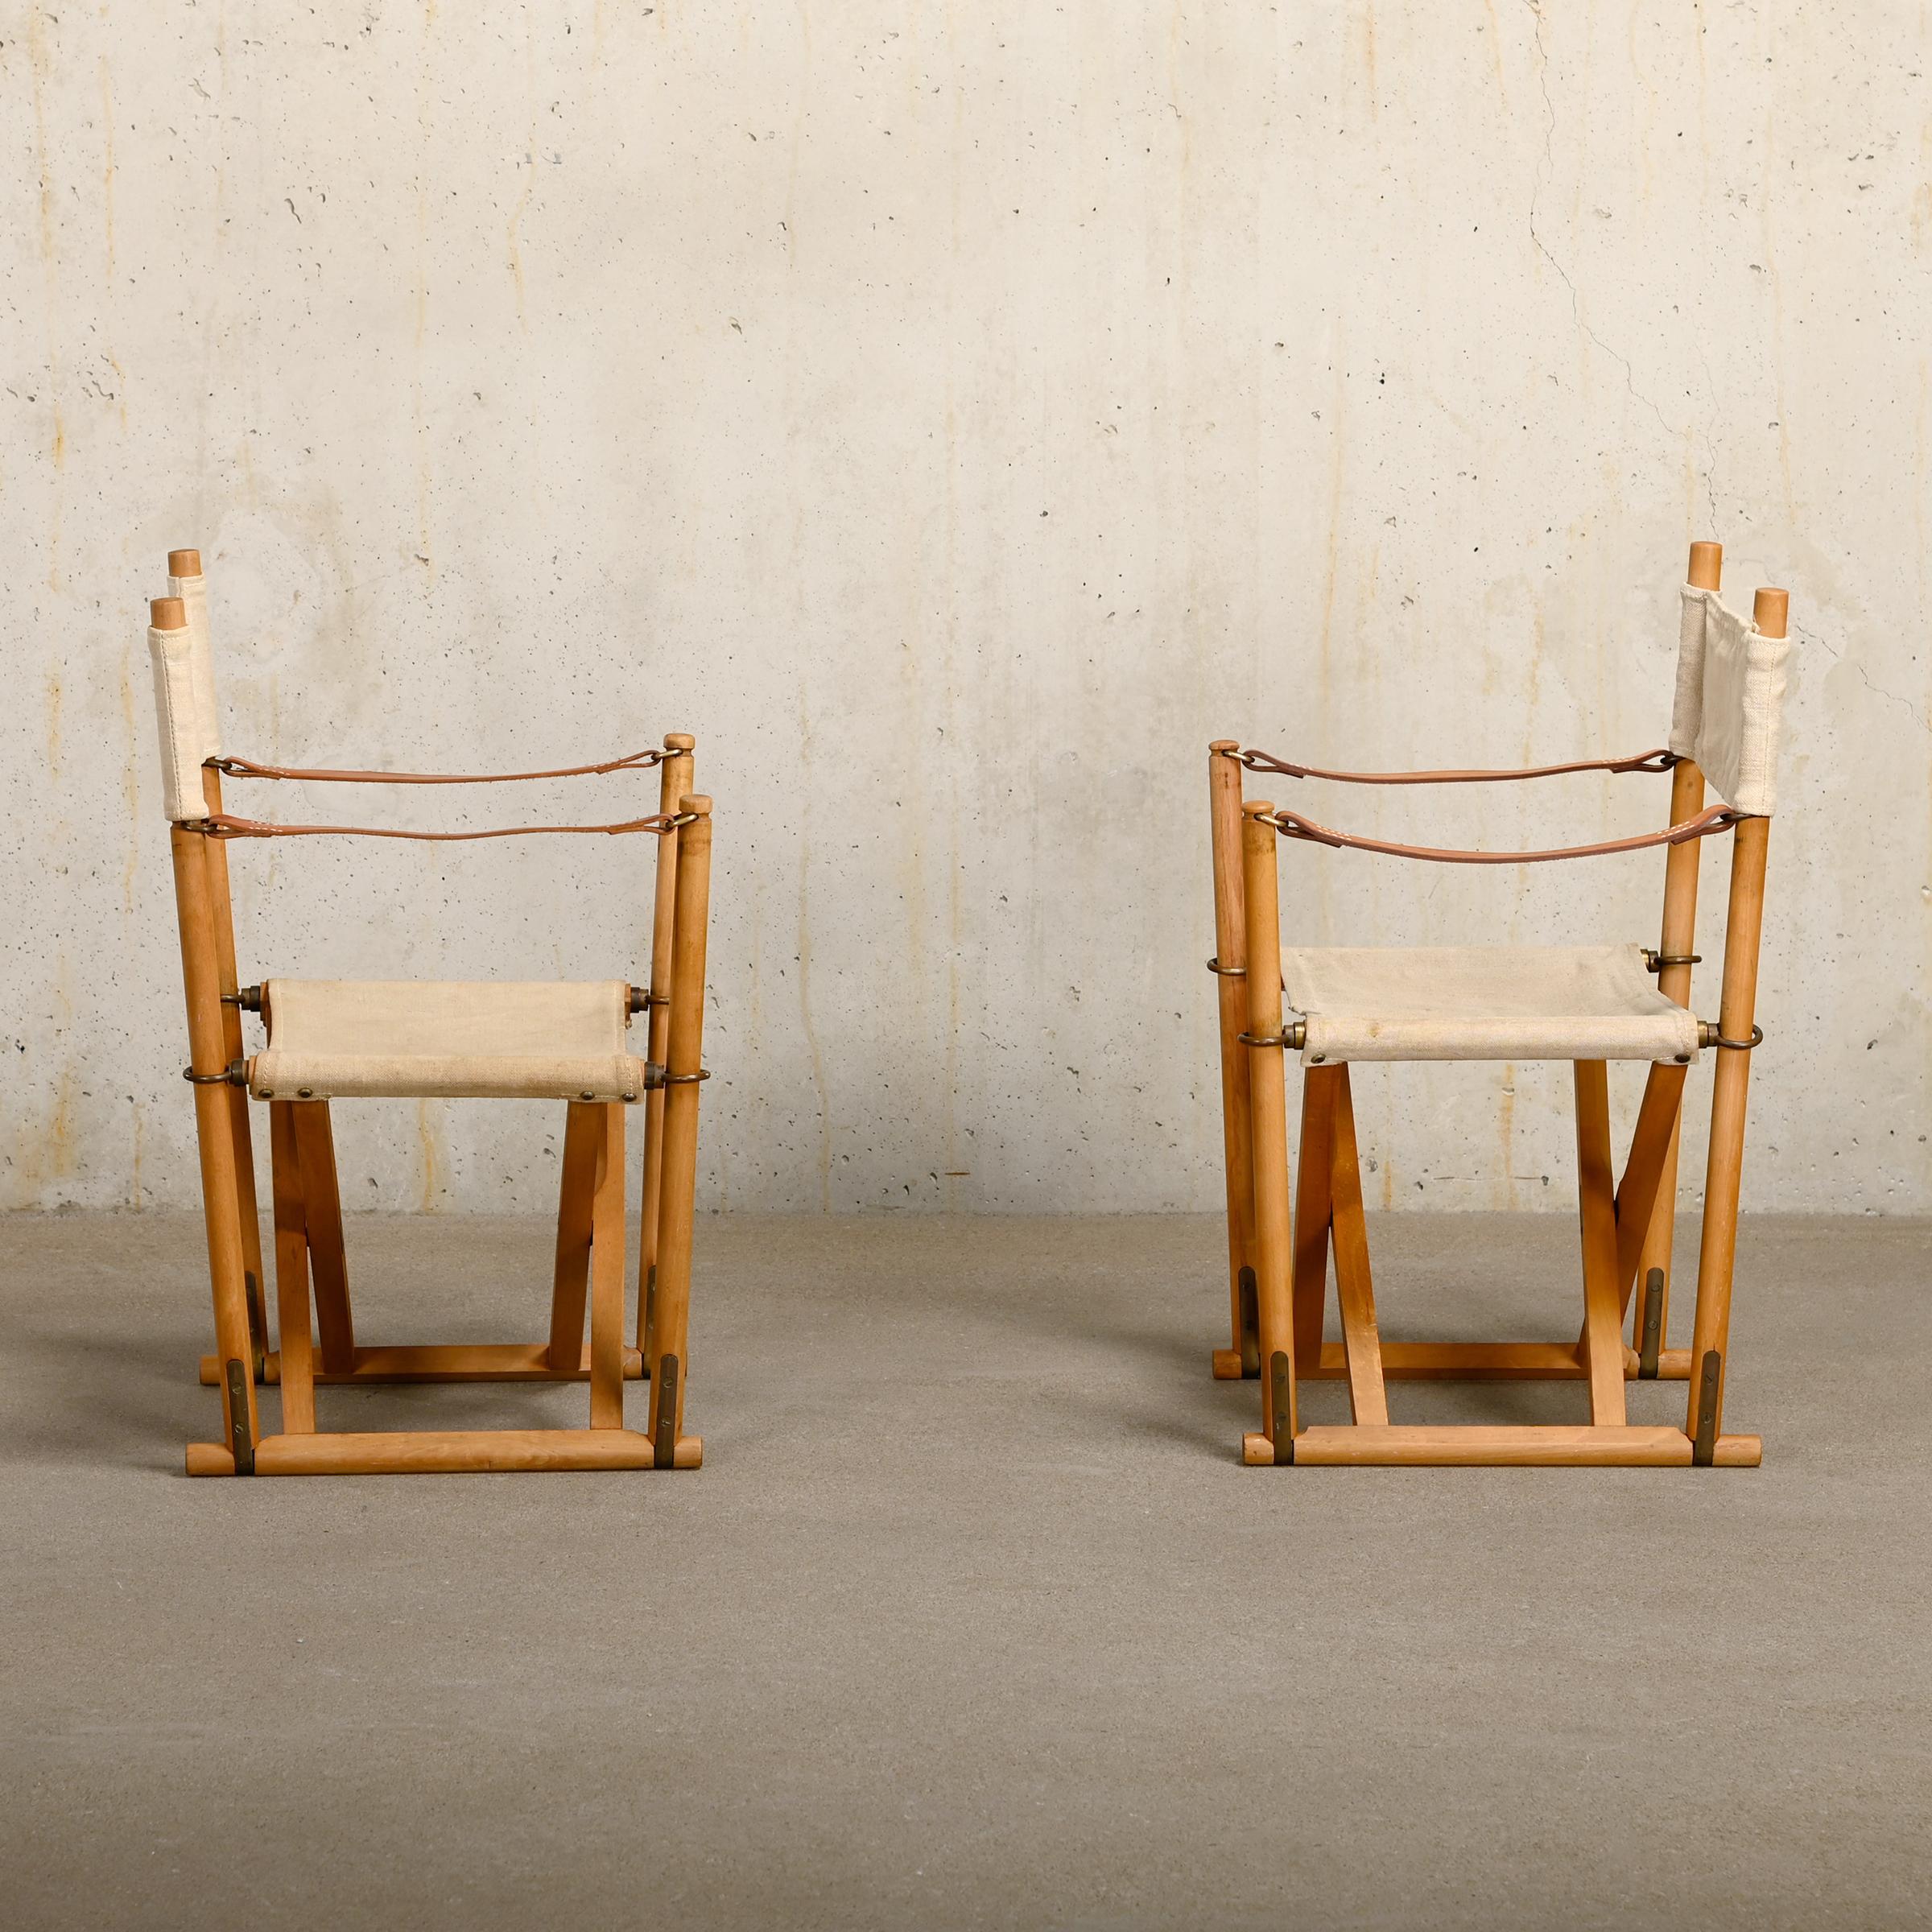 Beautiful made Folding Chairs (model MK16) designed by Mogens Koch in the early thirties. These rare Children's examples are manufactured by Rud Rasmussen and features a beech wood frame with brass fittings and canvas upholstery with full-grain